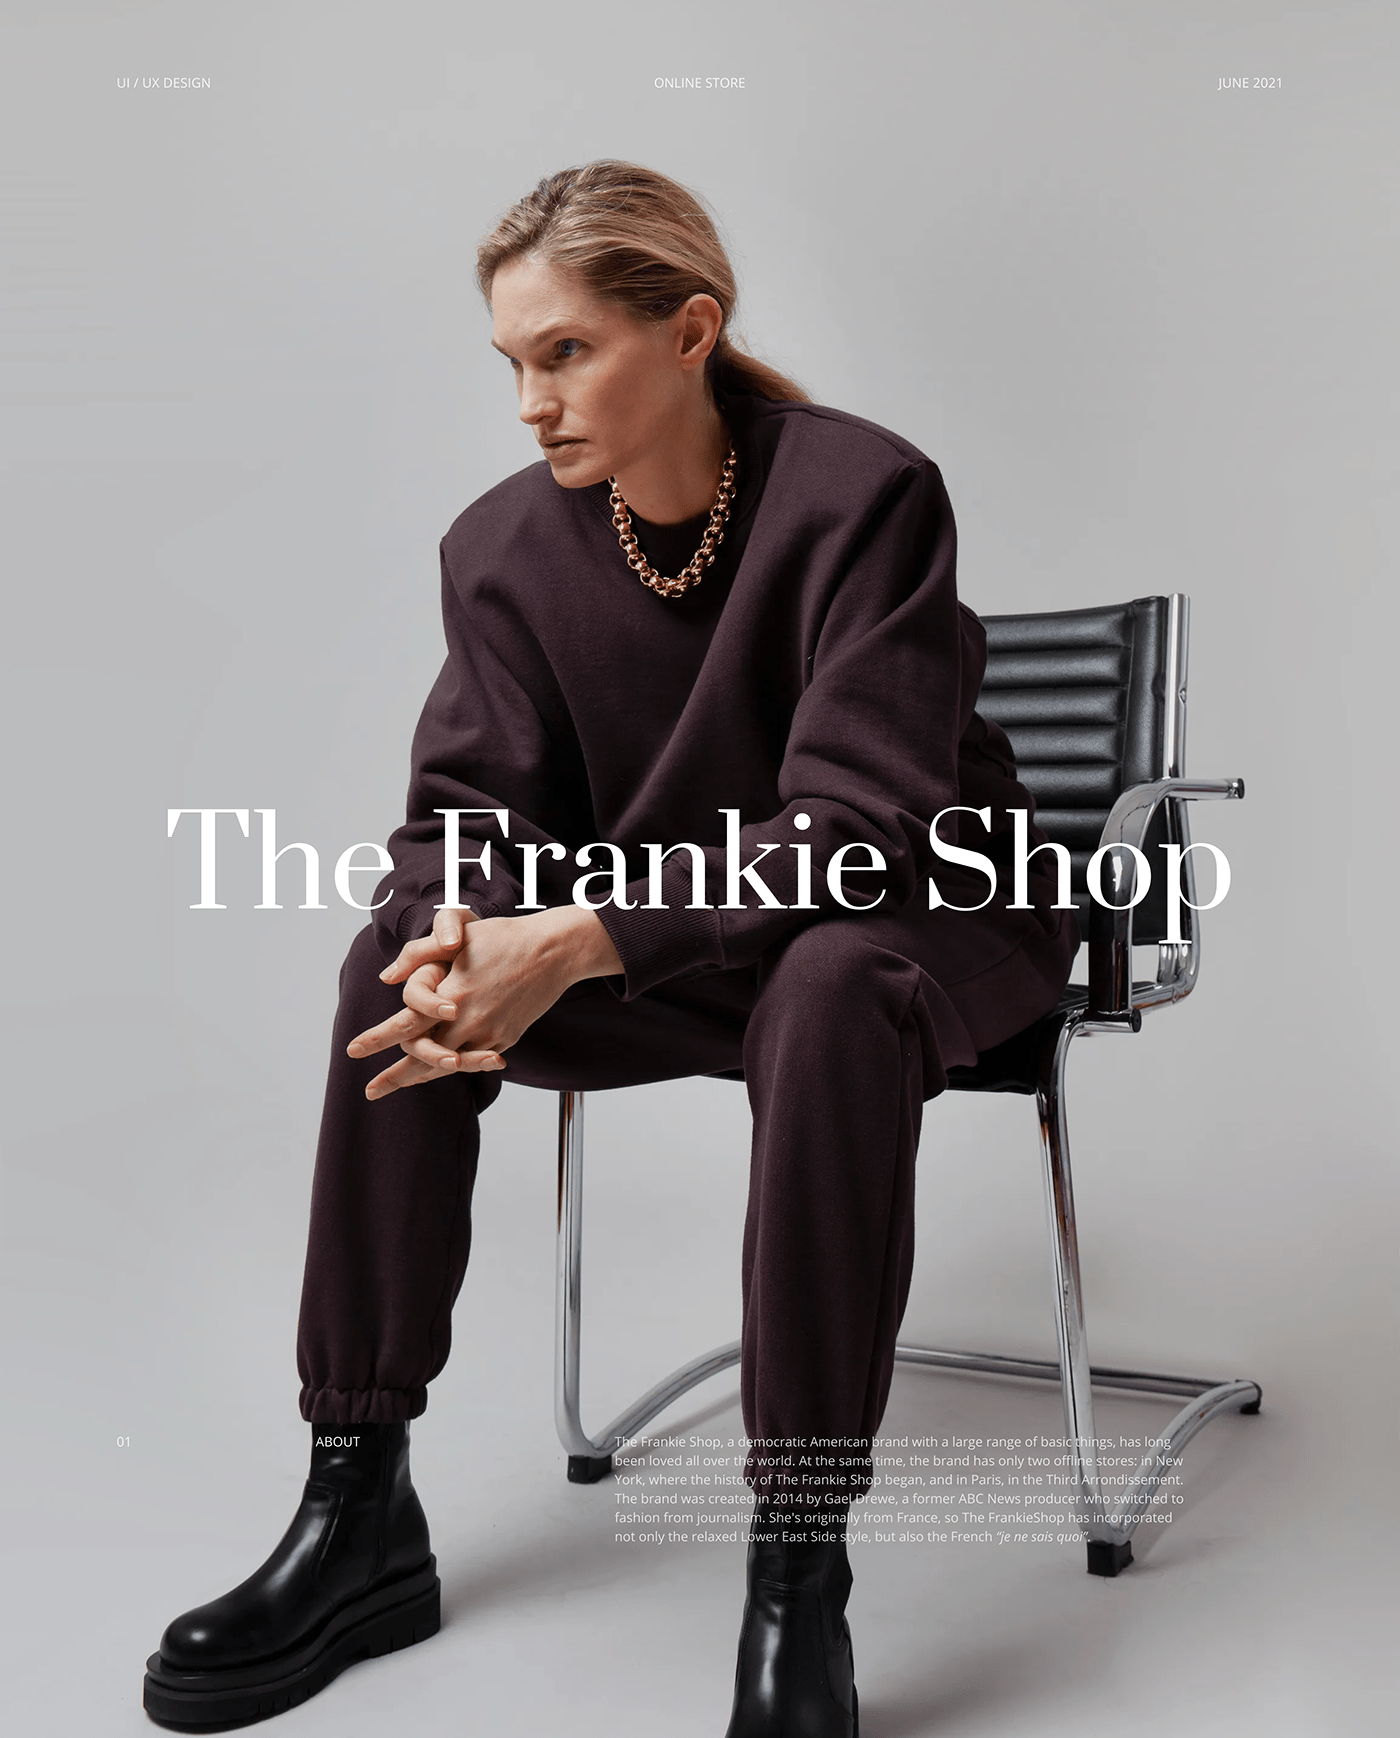 The Frankie Shop Online Store on Behance